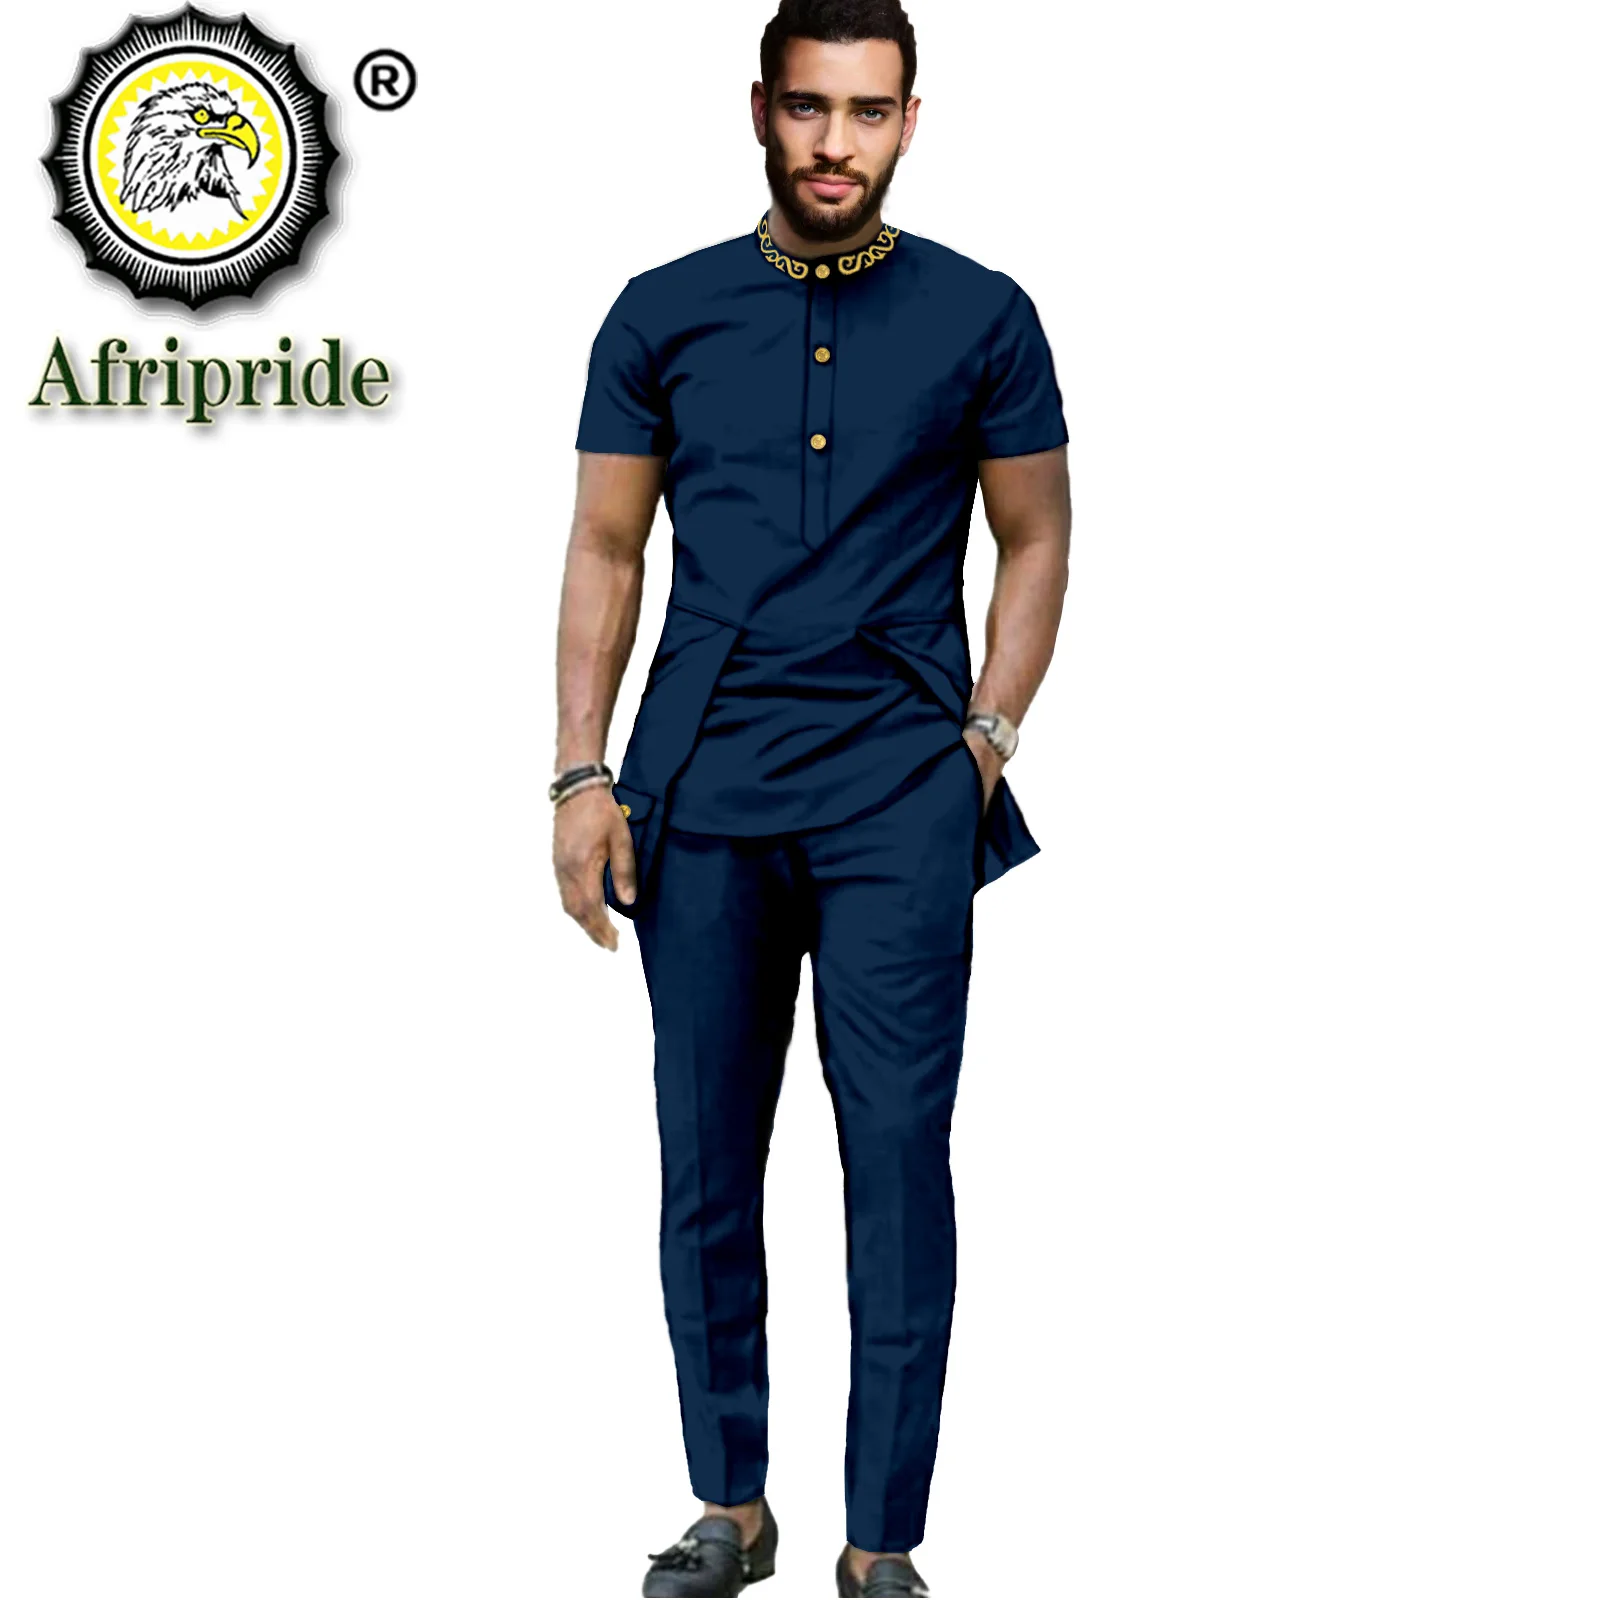 African Clothes for Men Embroidery Short Sleeve Shirt and Pant 2 Piece Set Dashiki Outfit Plus Size Tracksuit Blouse S2116011 african men s clothing dashiki tops and pants 2 piece set plus size casual tracksuit african suits shirts blouse attire a2216044